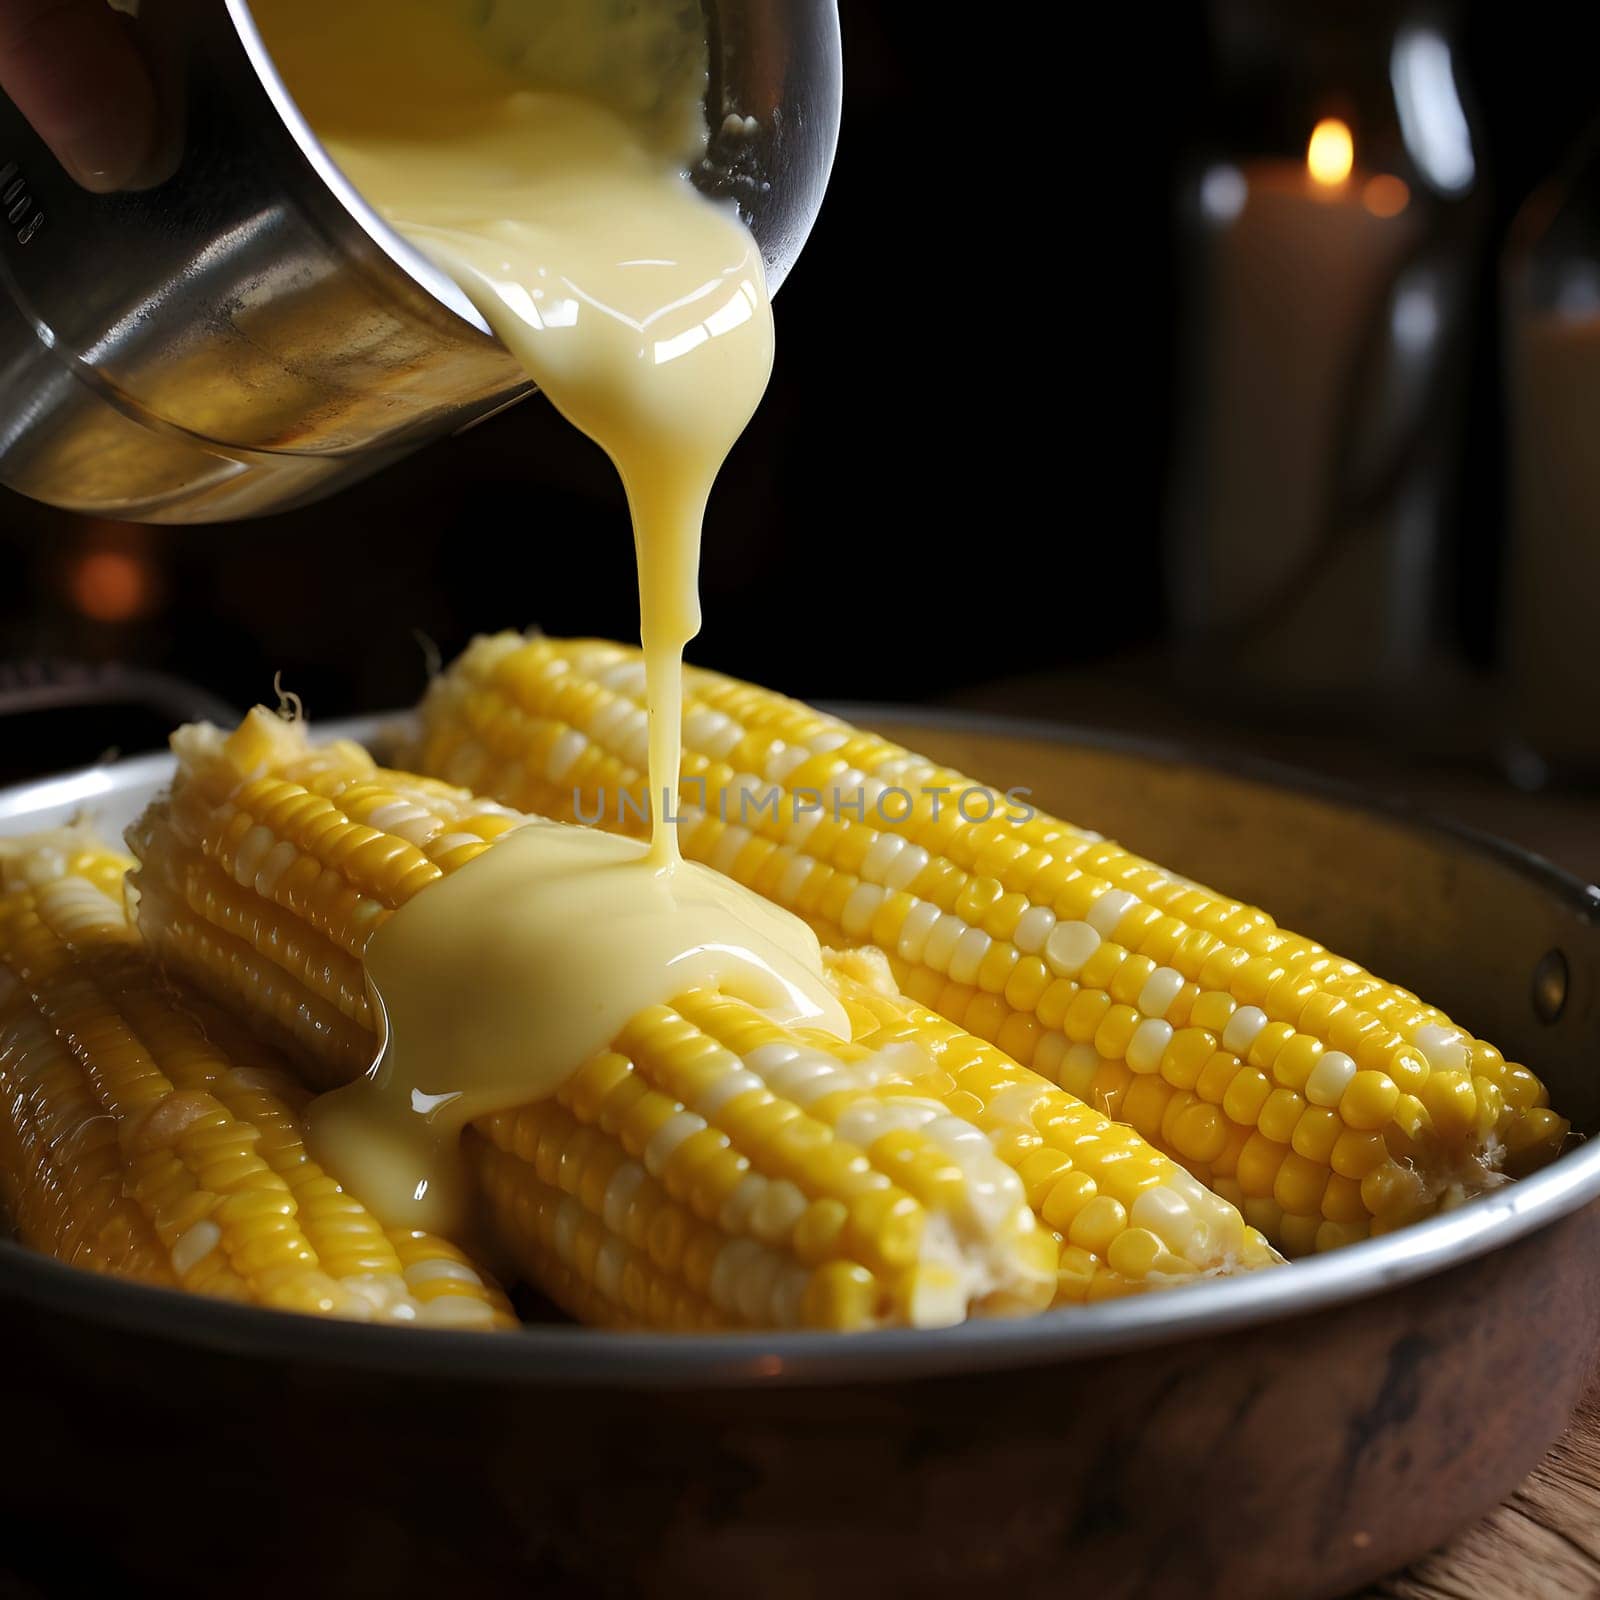 Yellow corn cob on a plate cast with corn sauce. Corn as a dish of thanksgiving for the harvest. An atmosphere of joy and celebration.